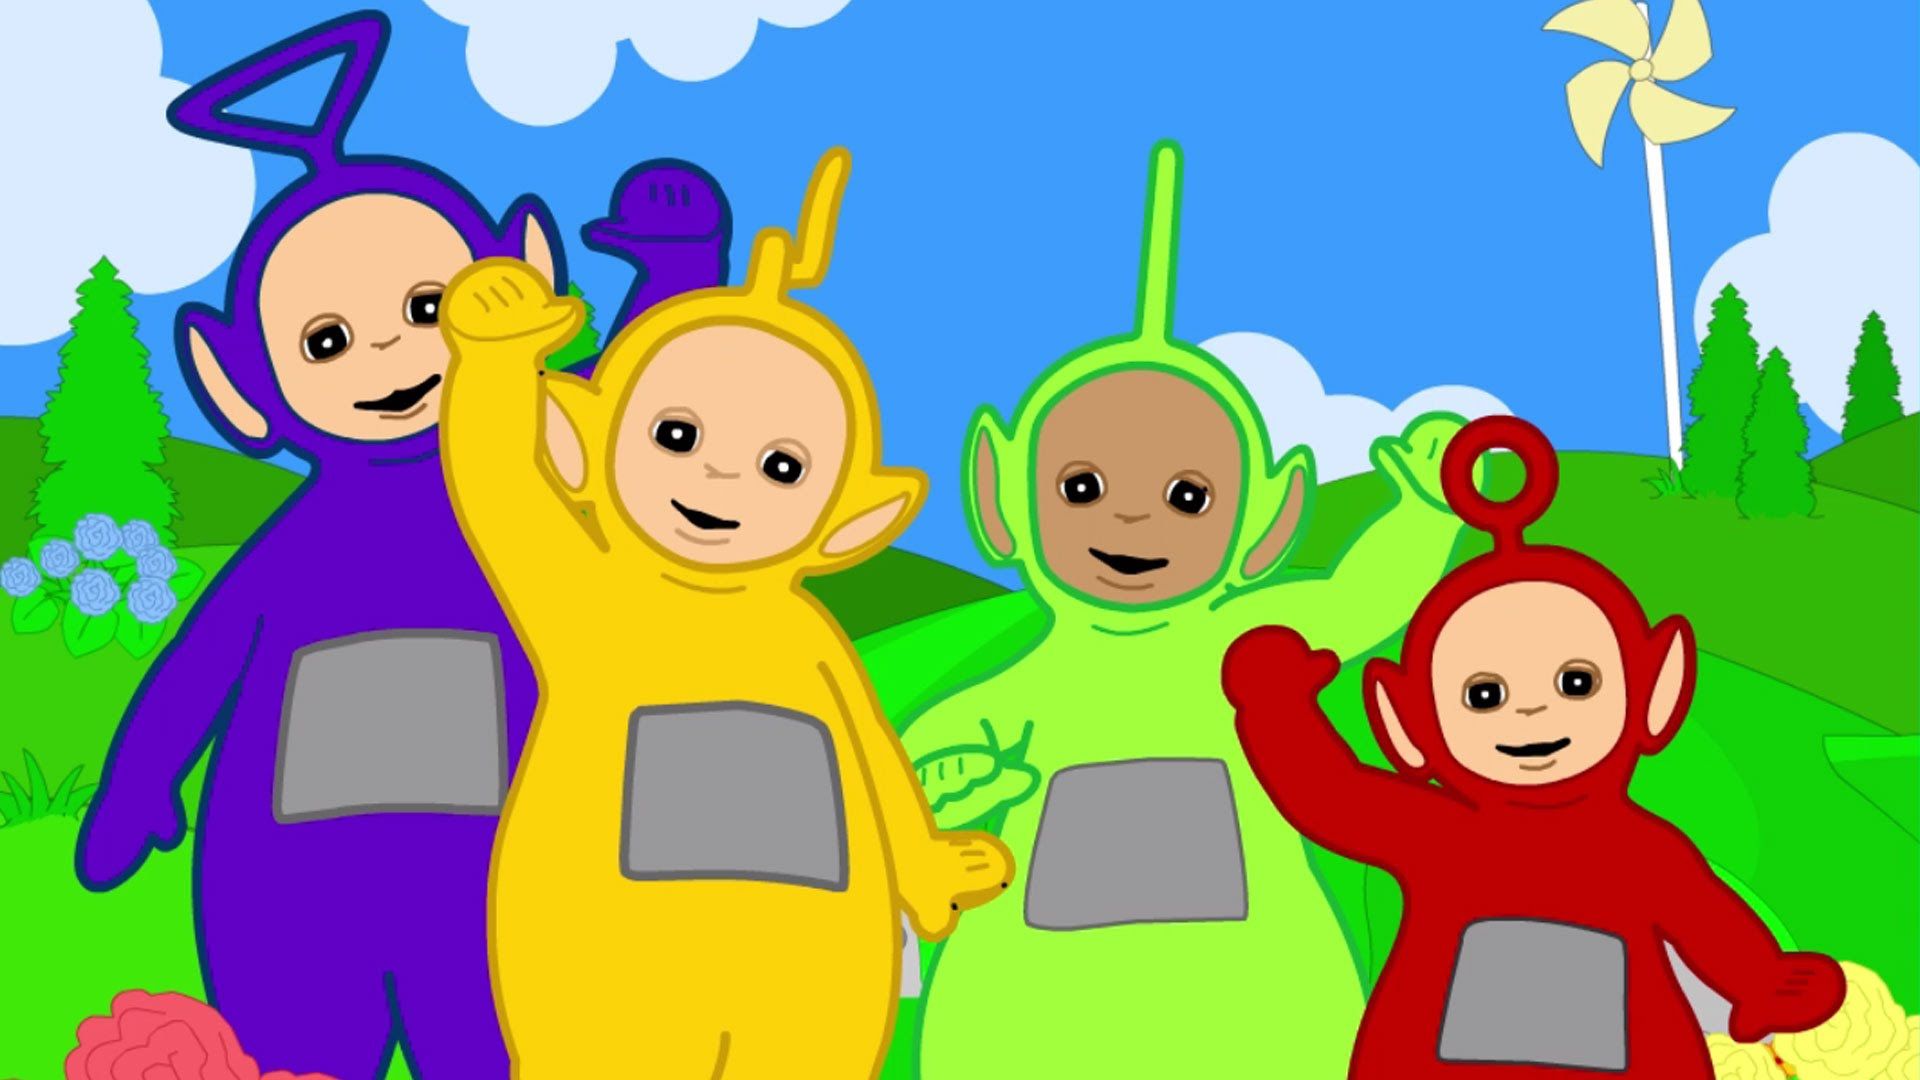 Teletubbies - Sliding Down the Hill - YouTube